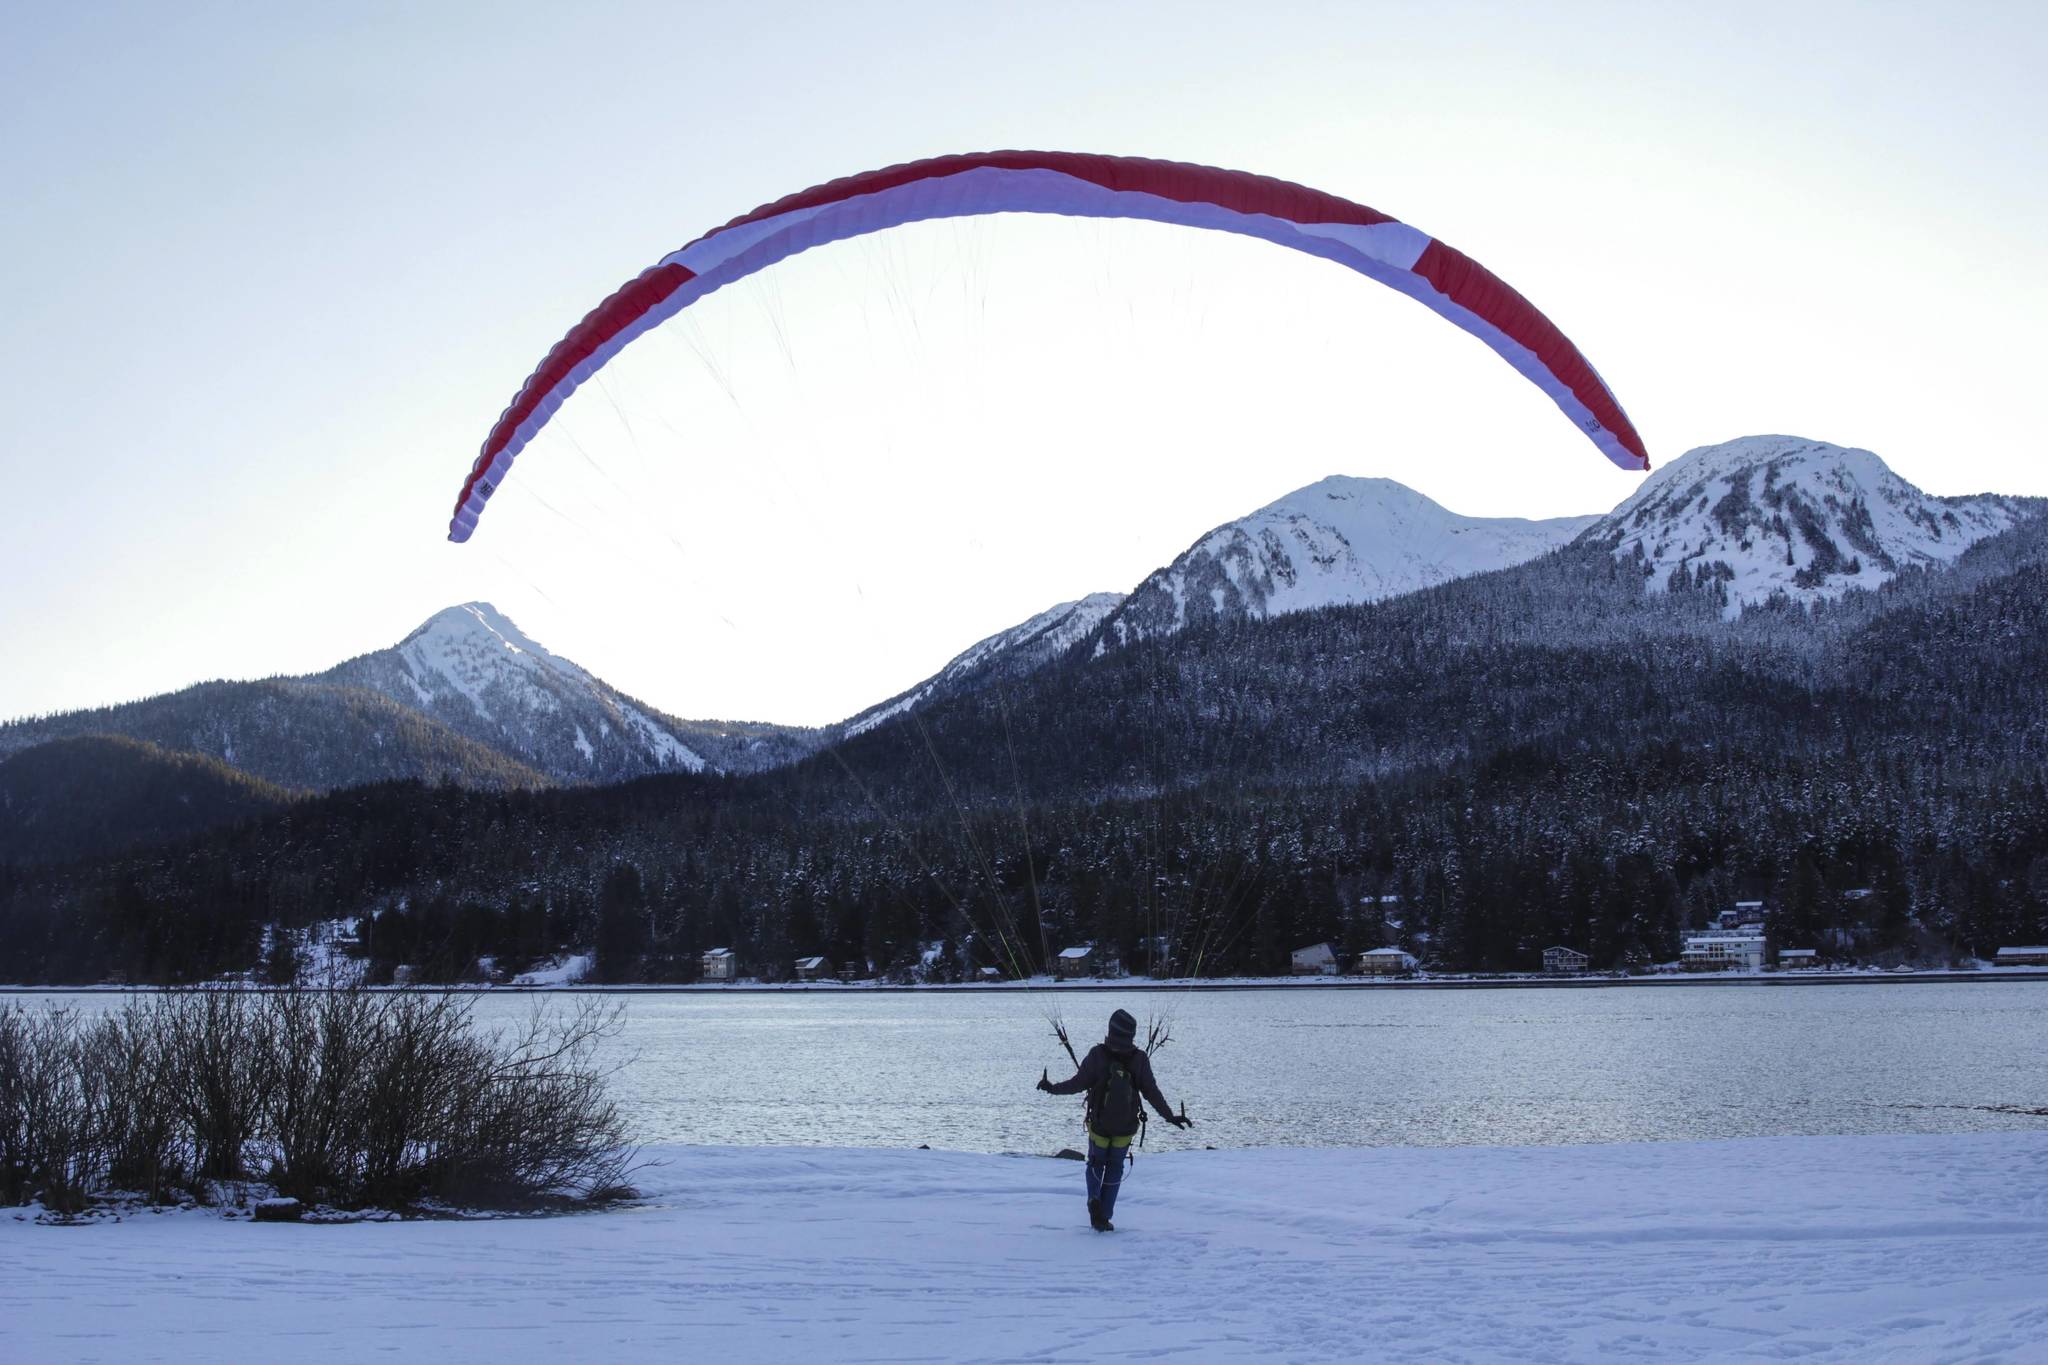 Robert Fawcett familiarizes himself with a new wing alongside the Gastineau Channel at Wayside Park on Jan. 27, 2021. “When you’re up on the mountain, you get more variables, more winds and gusts,” Fawcett said in a brief interview. “The same controls you use in the air, you use on the ground. It’s always good to practice.” Fawcett said he’d taken the wing off a mountain on Monday. “I like the hike up,” Fawcett said. “I don’t like the hike down.” (Michael S. Lockett / Juneau Empire)